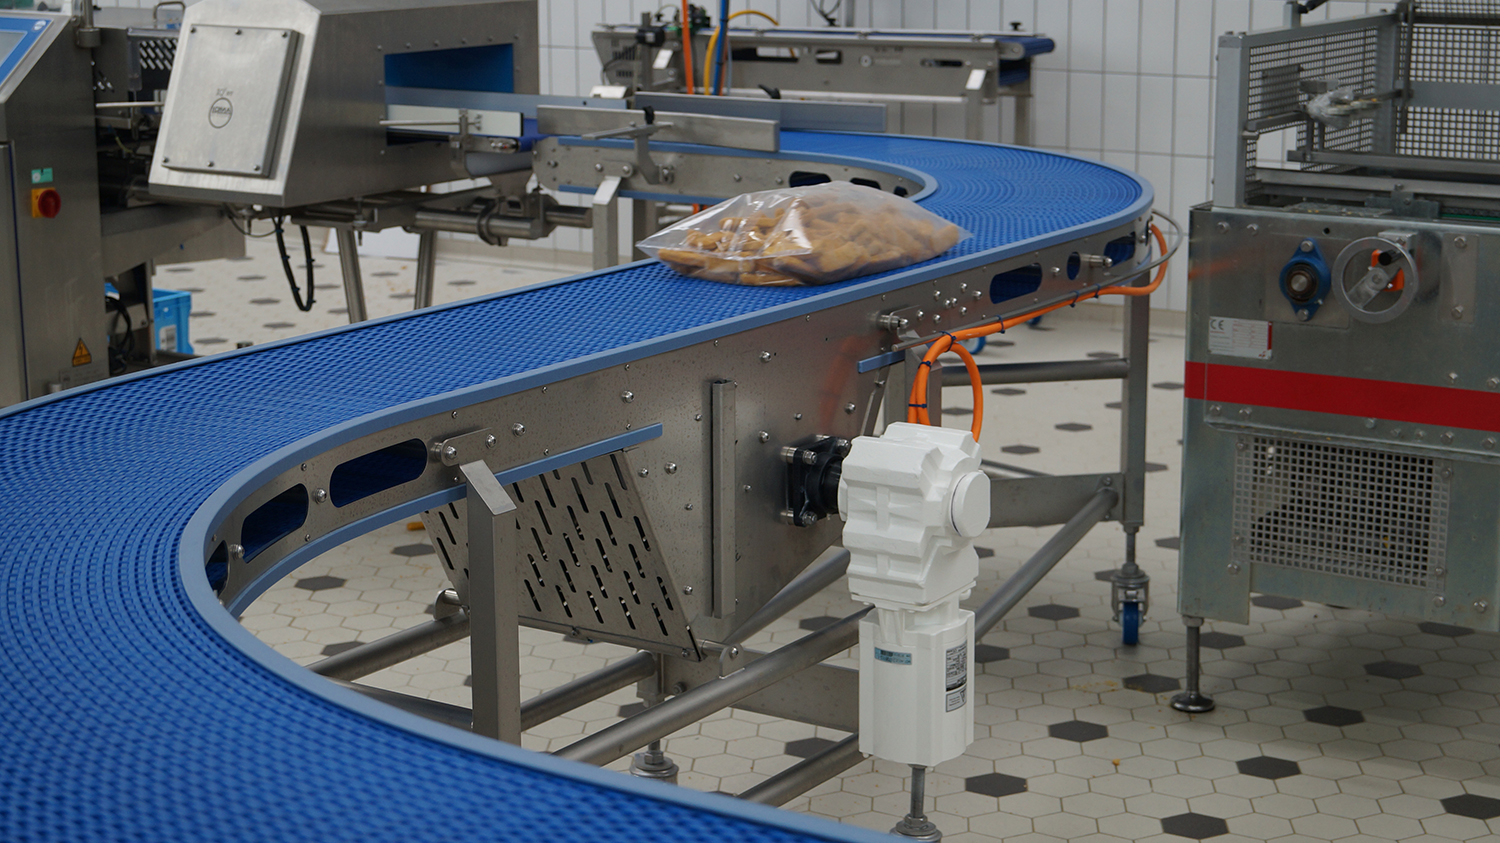 It is critical that any equipment operating on a food and beverage production line is designed to hygienic criteria. This includes motors driving conveyors.